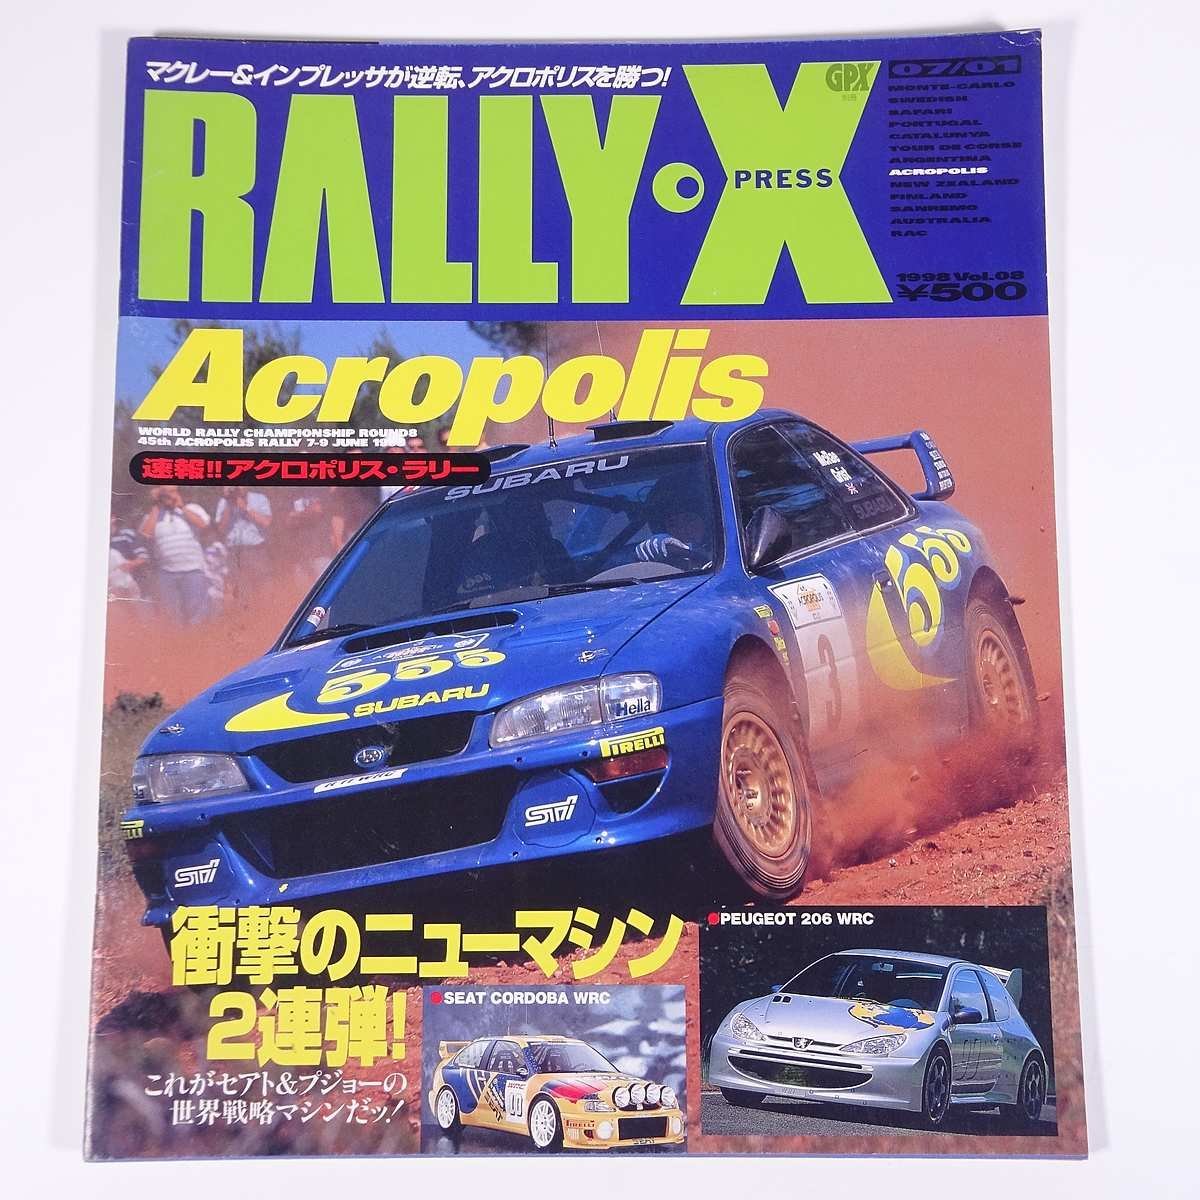 RALLY*Xpress Rally Express Vol.8 1998/7/1 mountain sea . large book@ automobile car Motor Sport news flash *a black Police * Rally another 